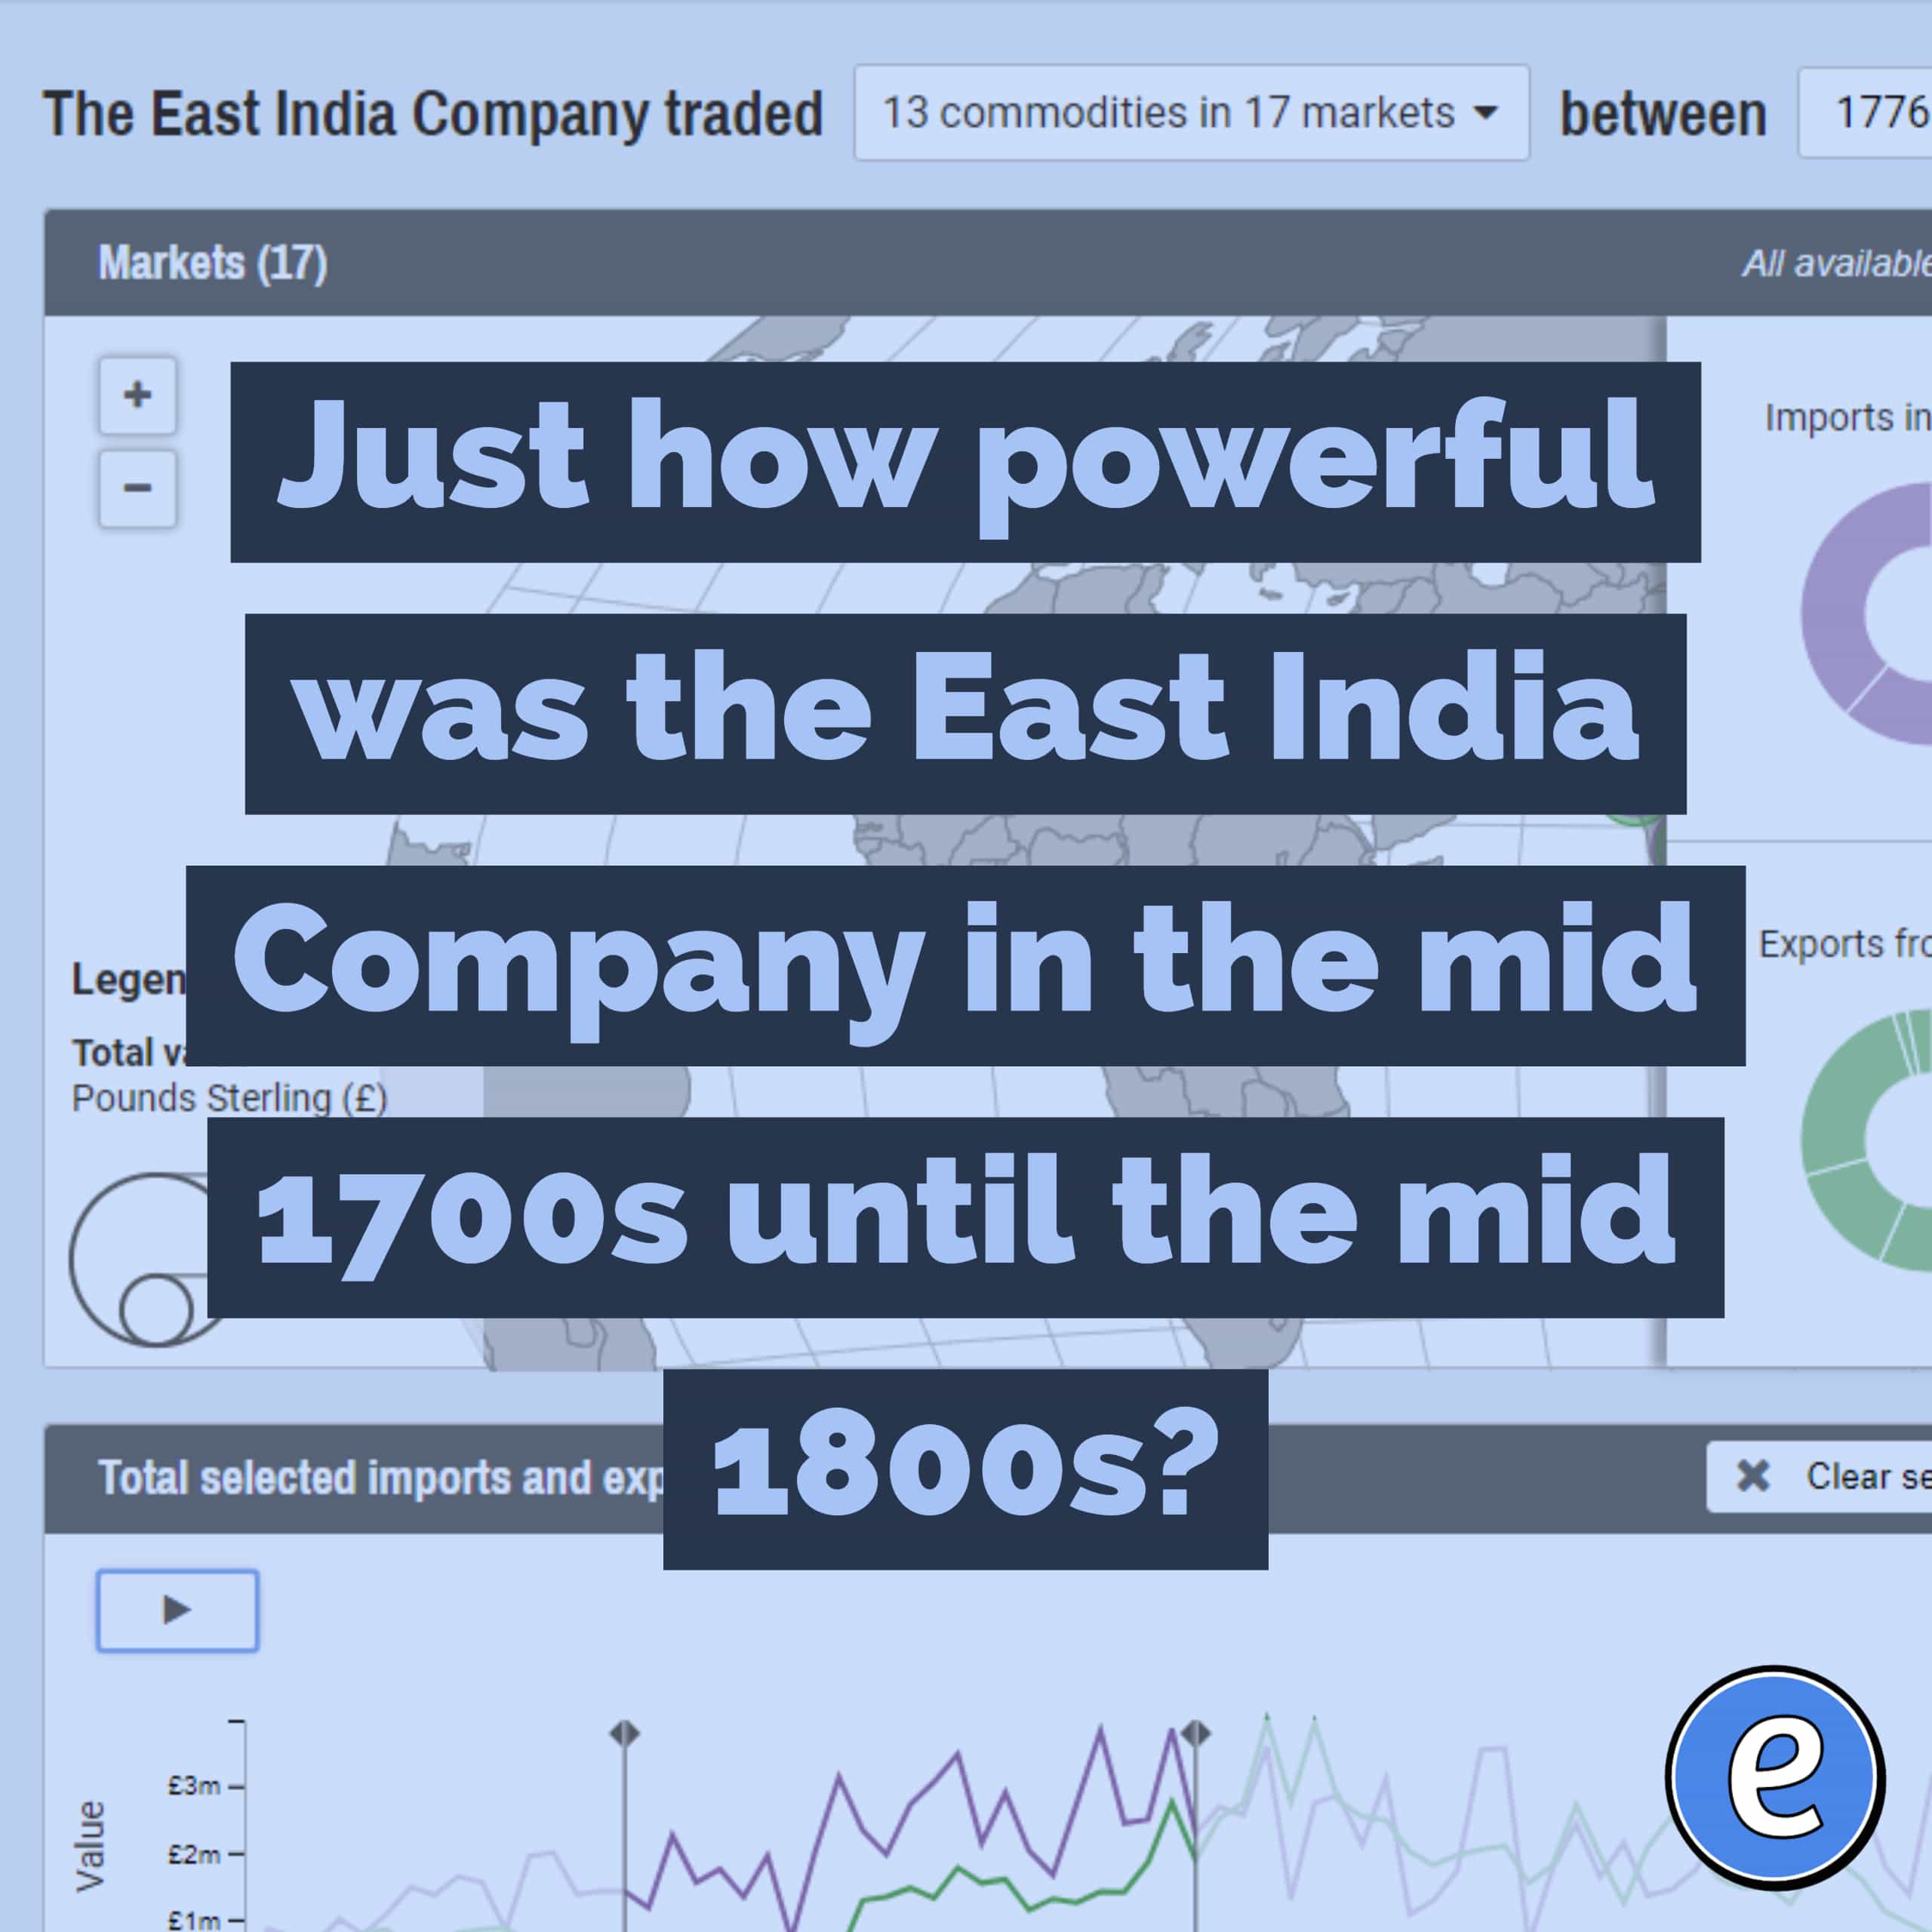 Just how powerful was the East India Company in the mid 1700s until the mid 1800s?